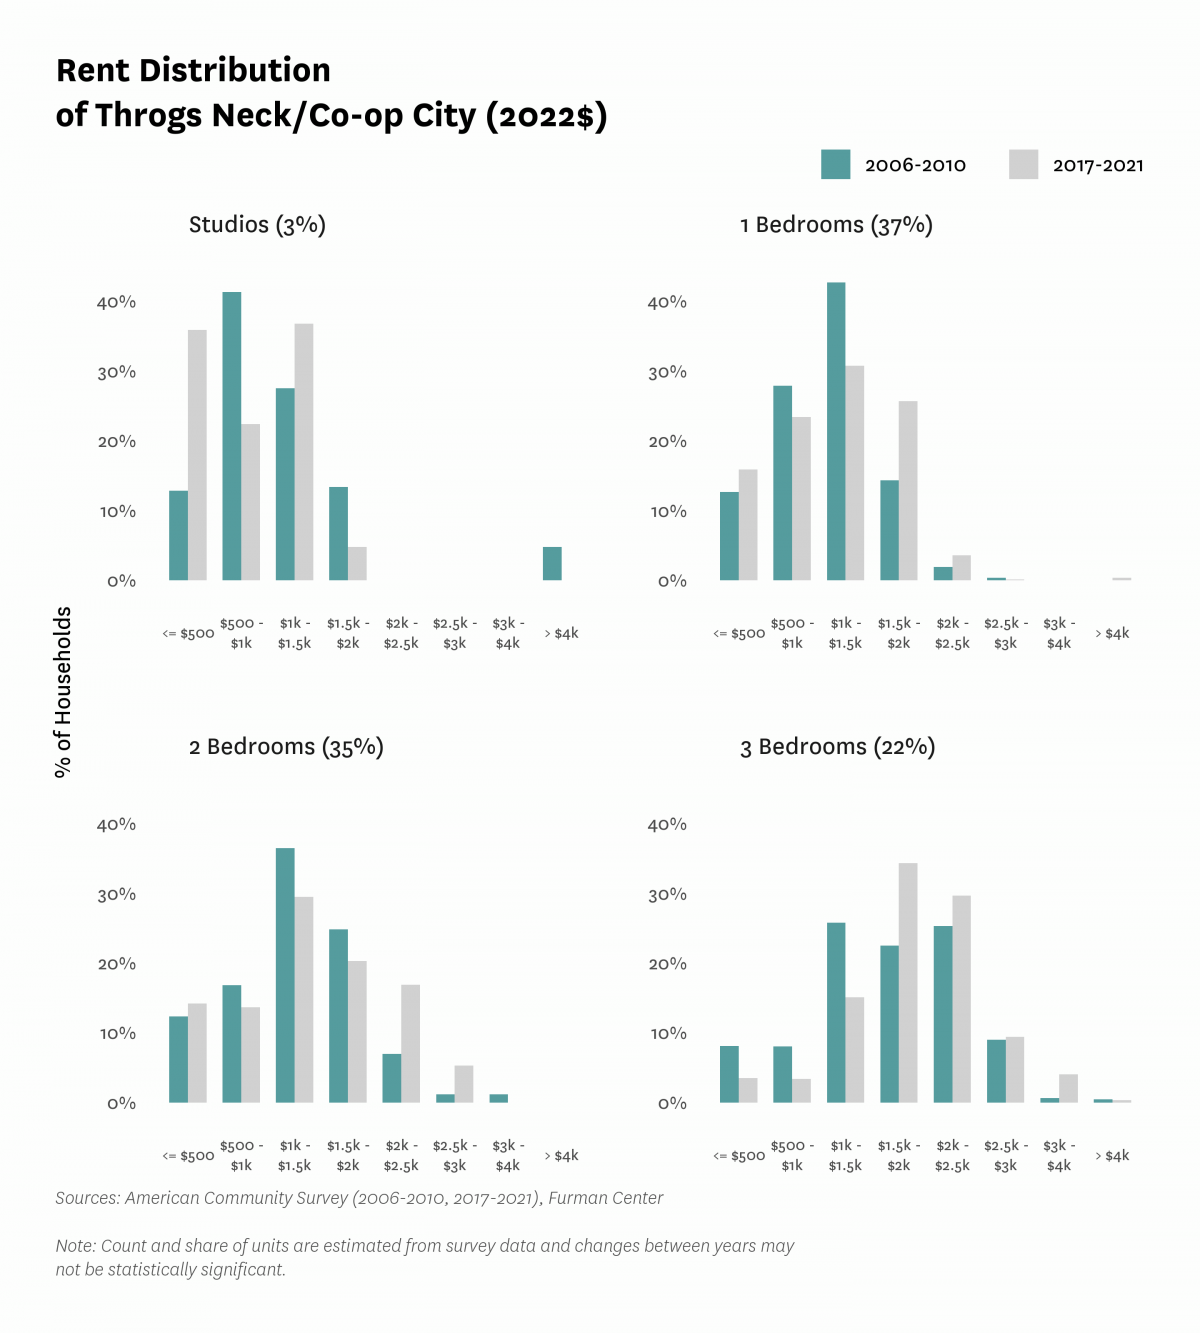 Graph showing the distribution of rents in Throgs Neck/Co-op City in both 2010 and 2017-2021.